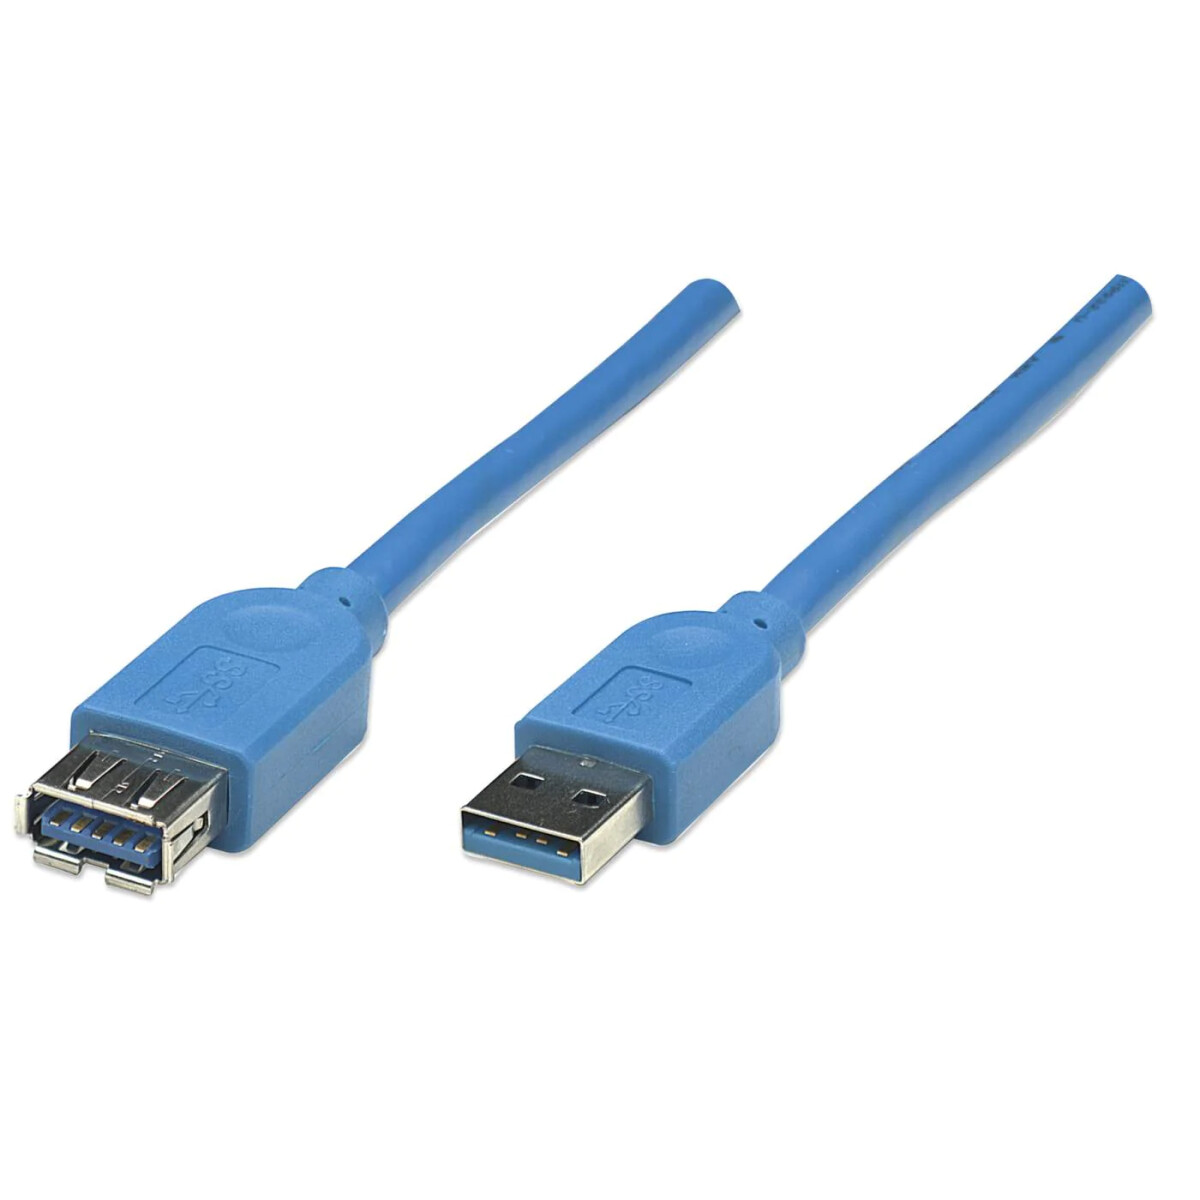 Cable USB 3,0 Extension 1 Mt. / Azul - Manhattan - Cable Usb 3,0 Extension 1 Mt. / Azul - Manhattan 